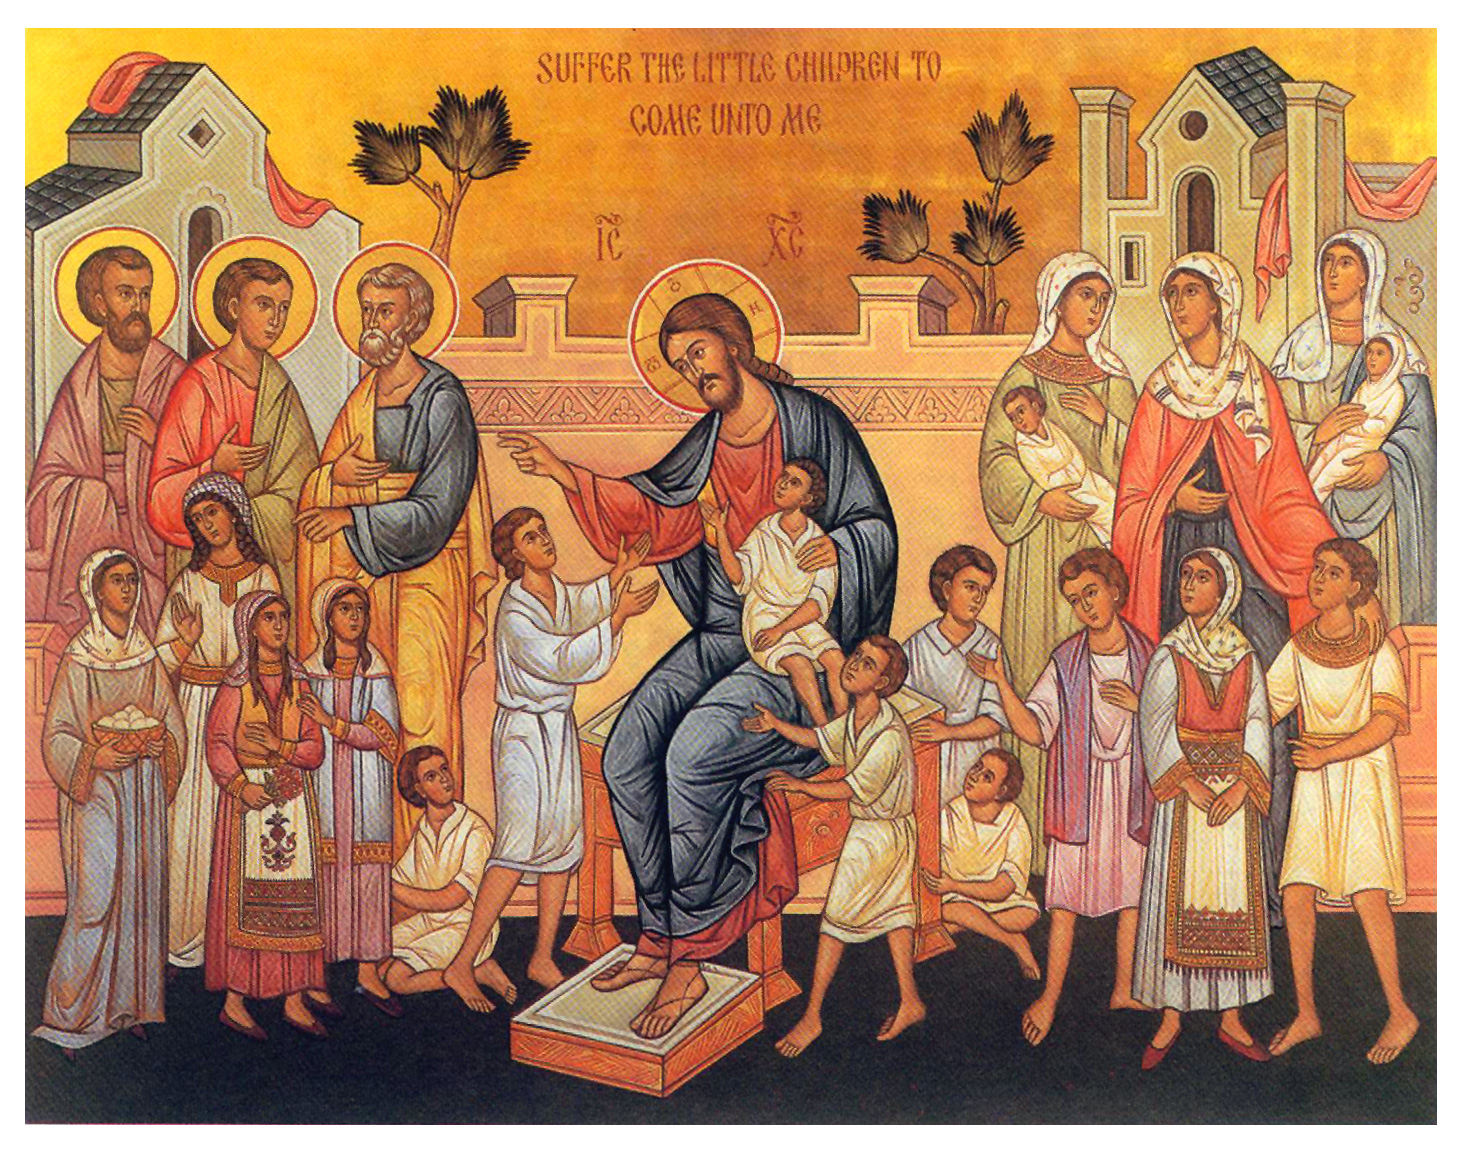 Let the children come to me - a video homily by Fr John Jesus